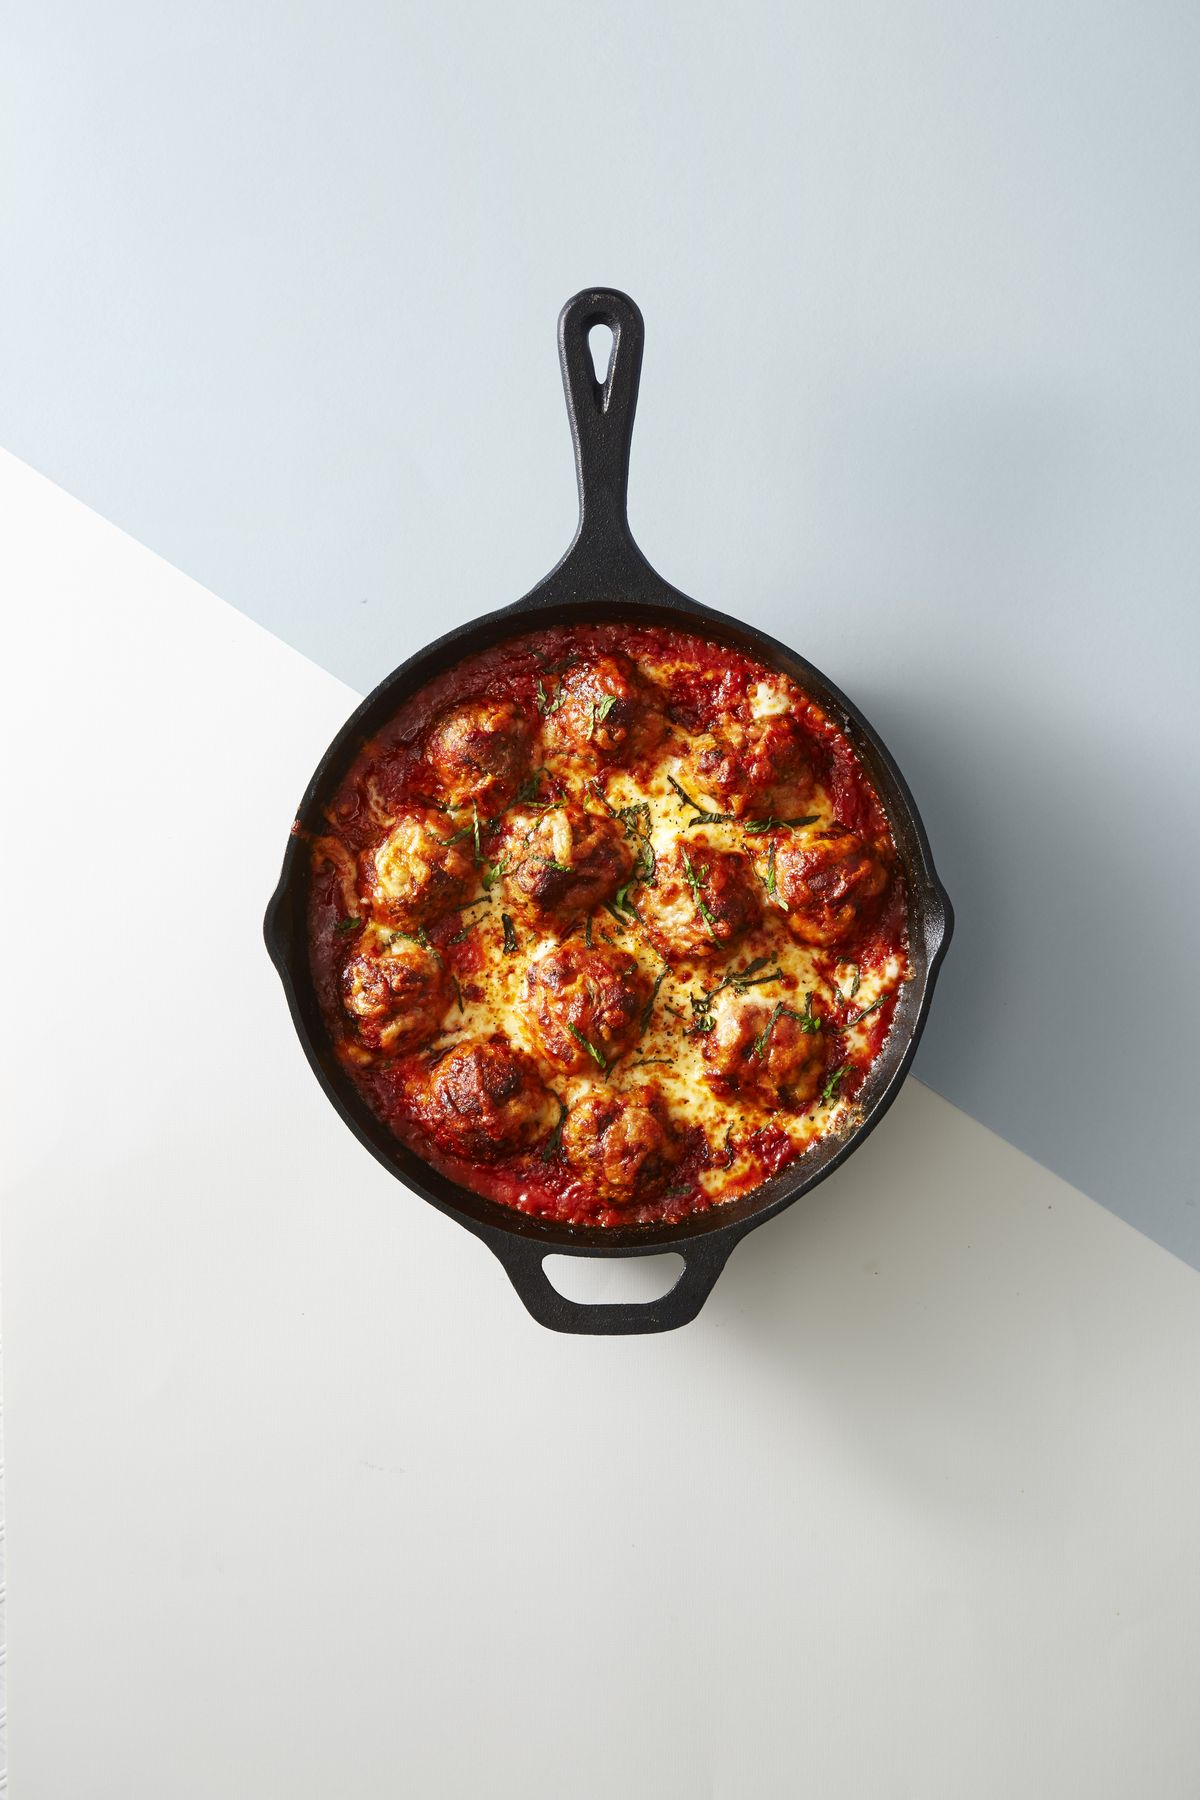 baked meatballs in a forged iron pan Doubly Cheesy Meatball Bake Doubly Cheesy Meatball Bake 1486497203 mike garten meatball bake 0317